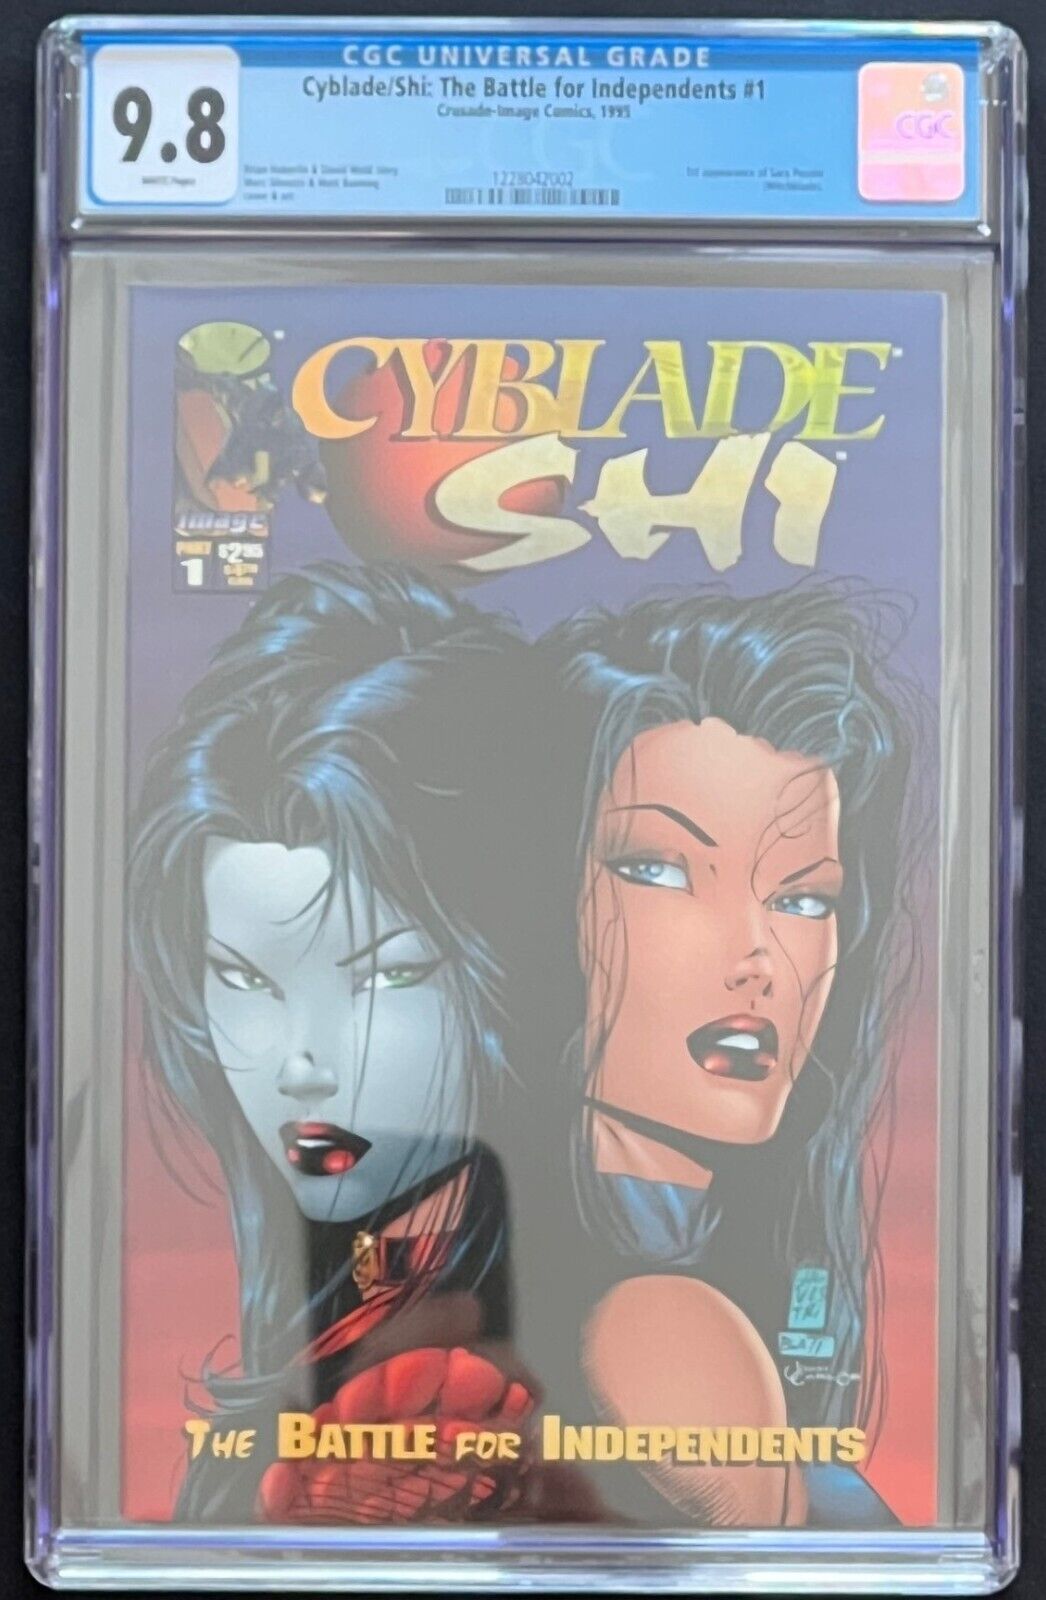 Cyblade/Shi: The Battle for Independents #1 Image 1995 CGC 9.8